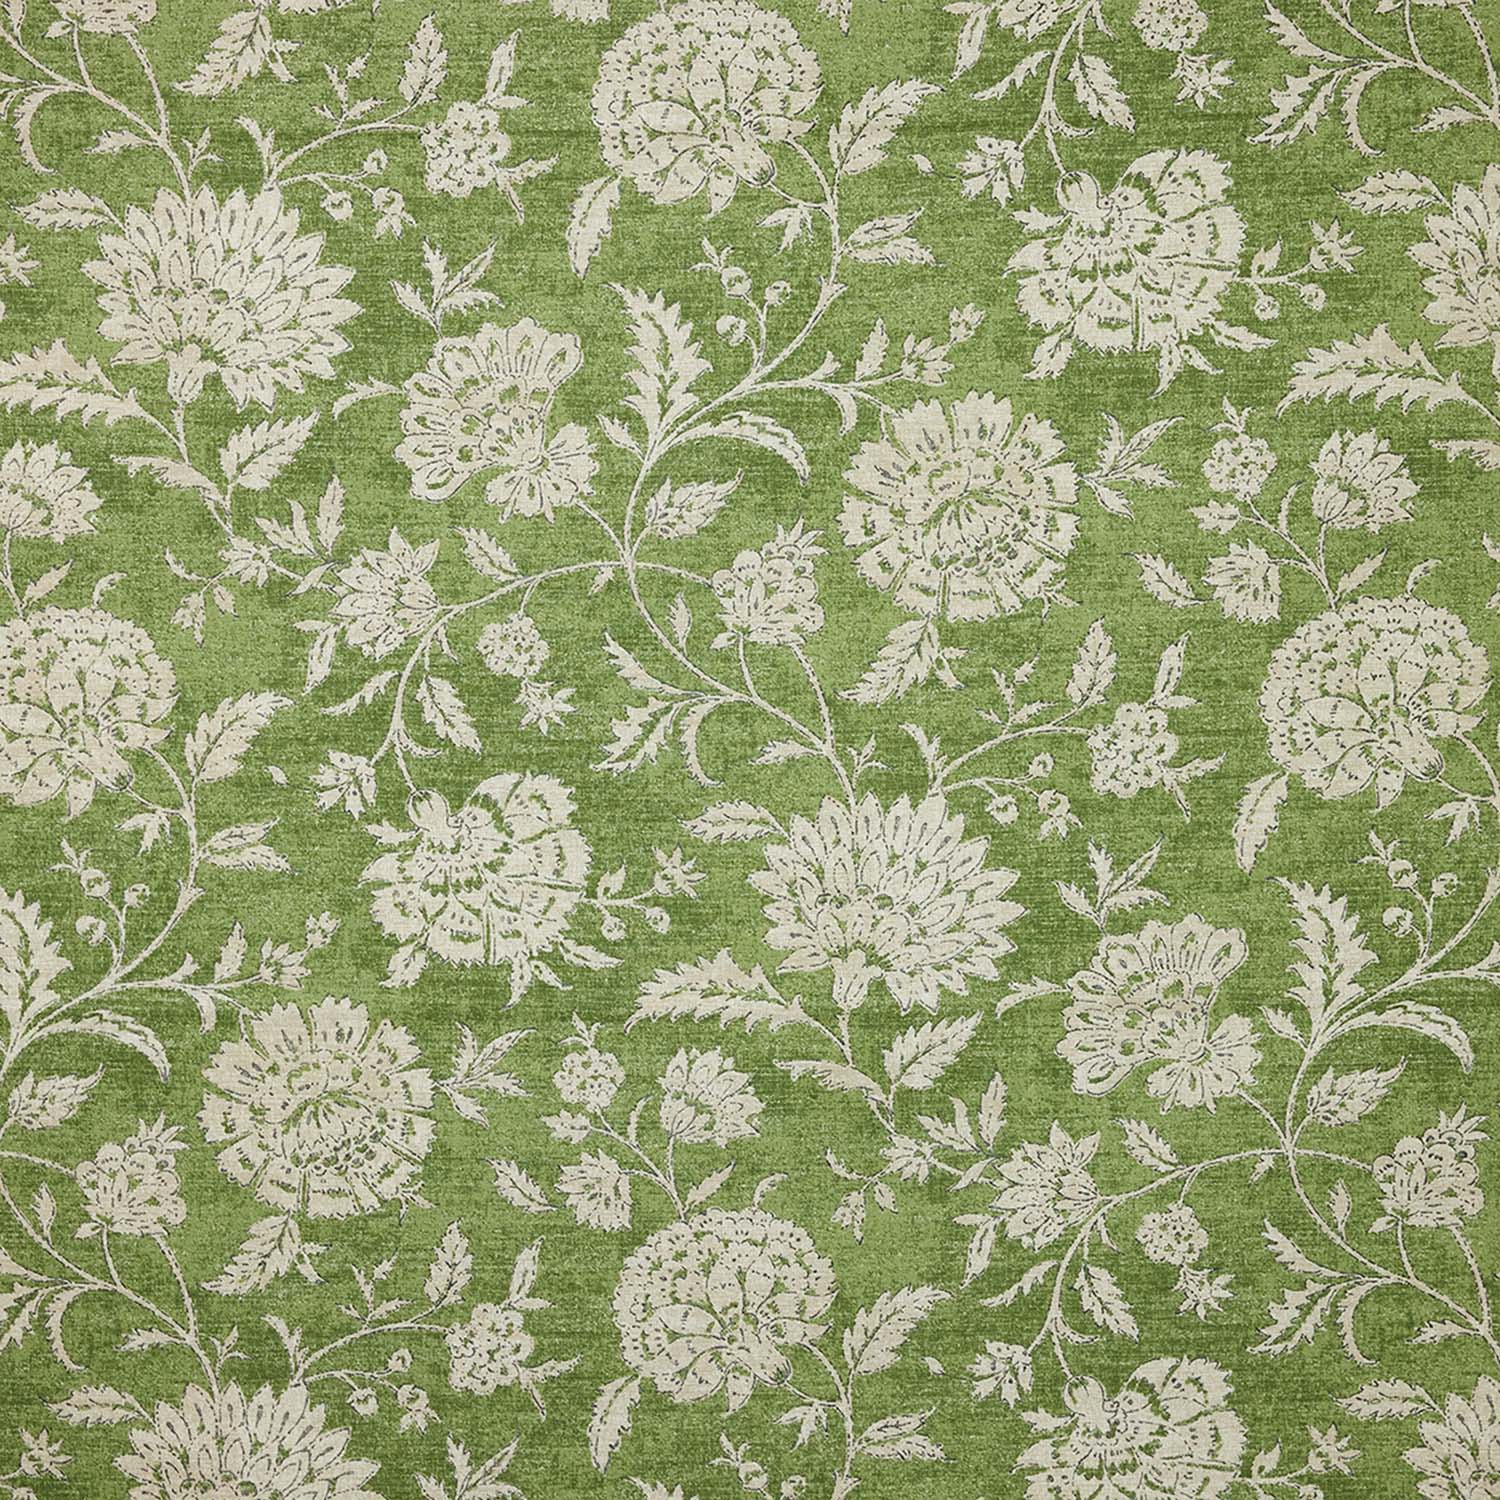 Green fabric with white floral pattern.